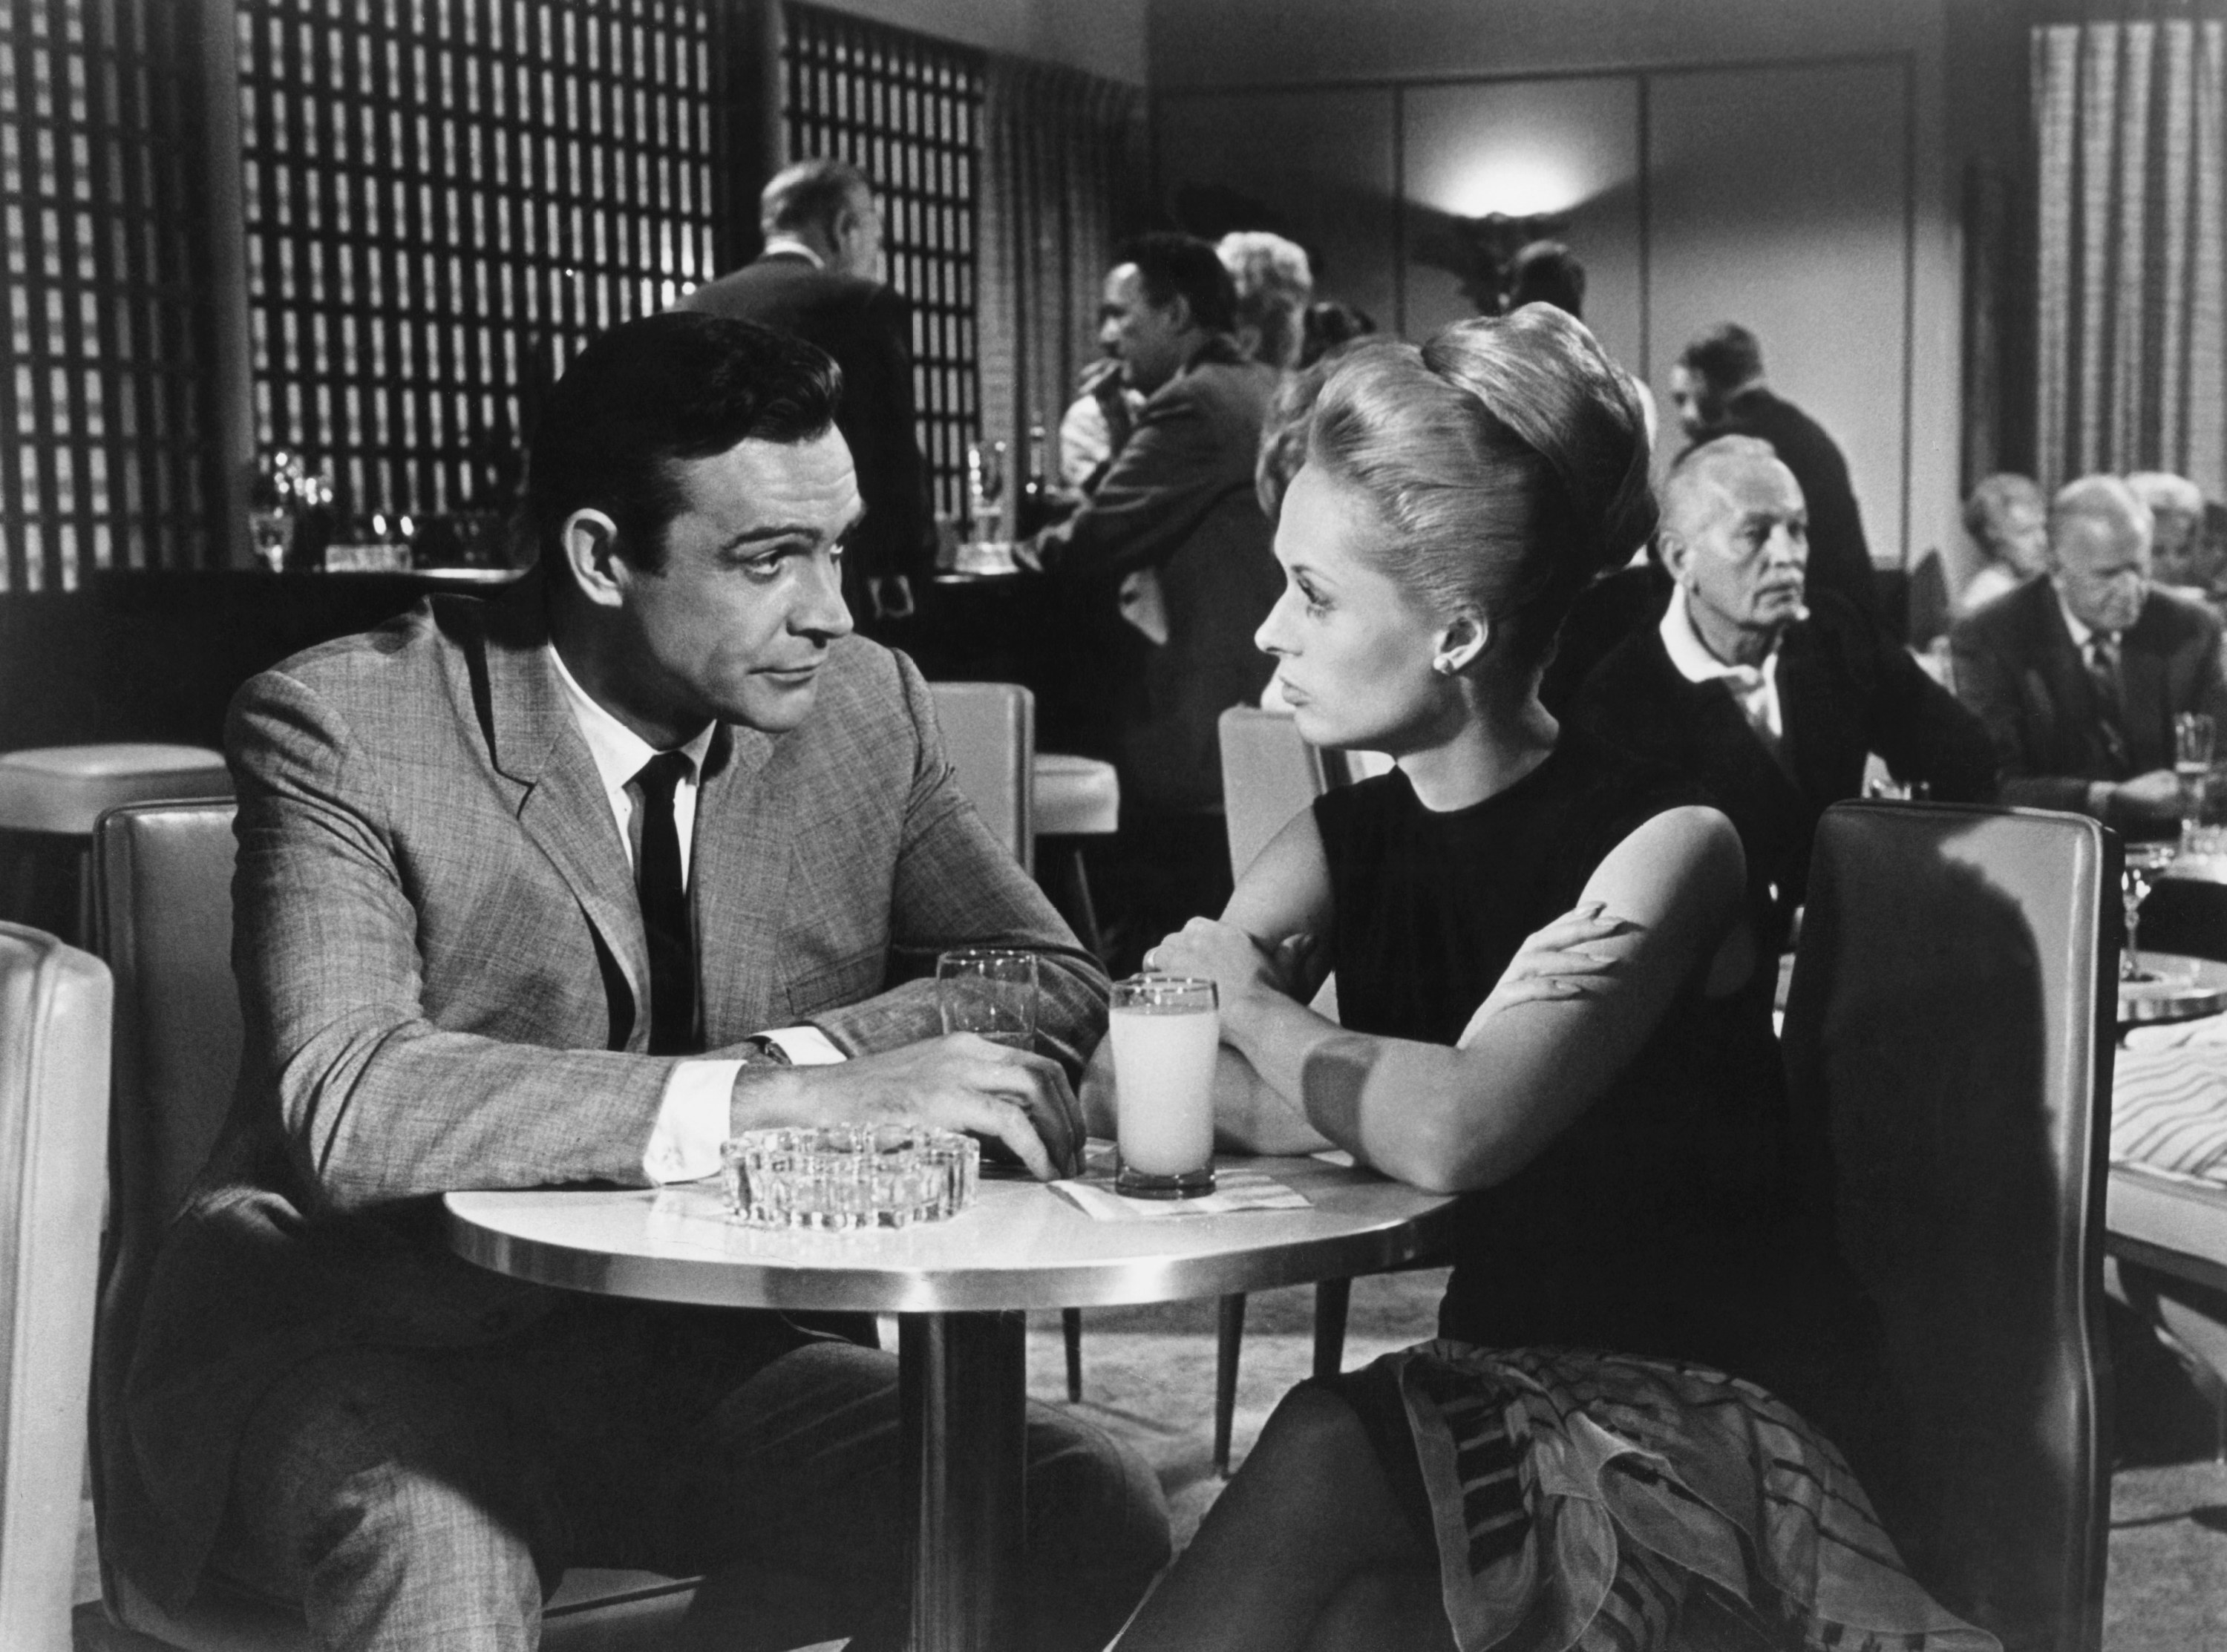 Sean Connery and Tippi Hedren sitting at a table.